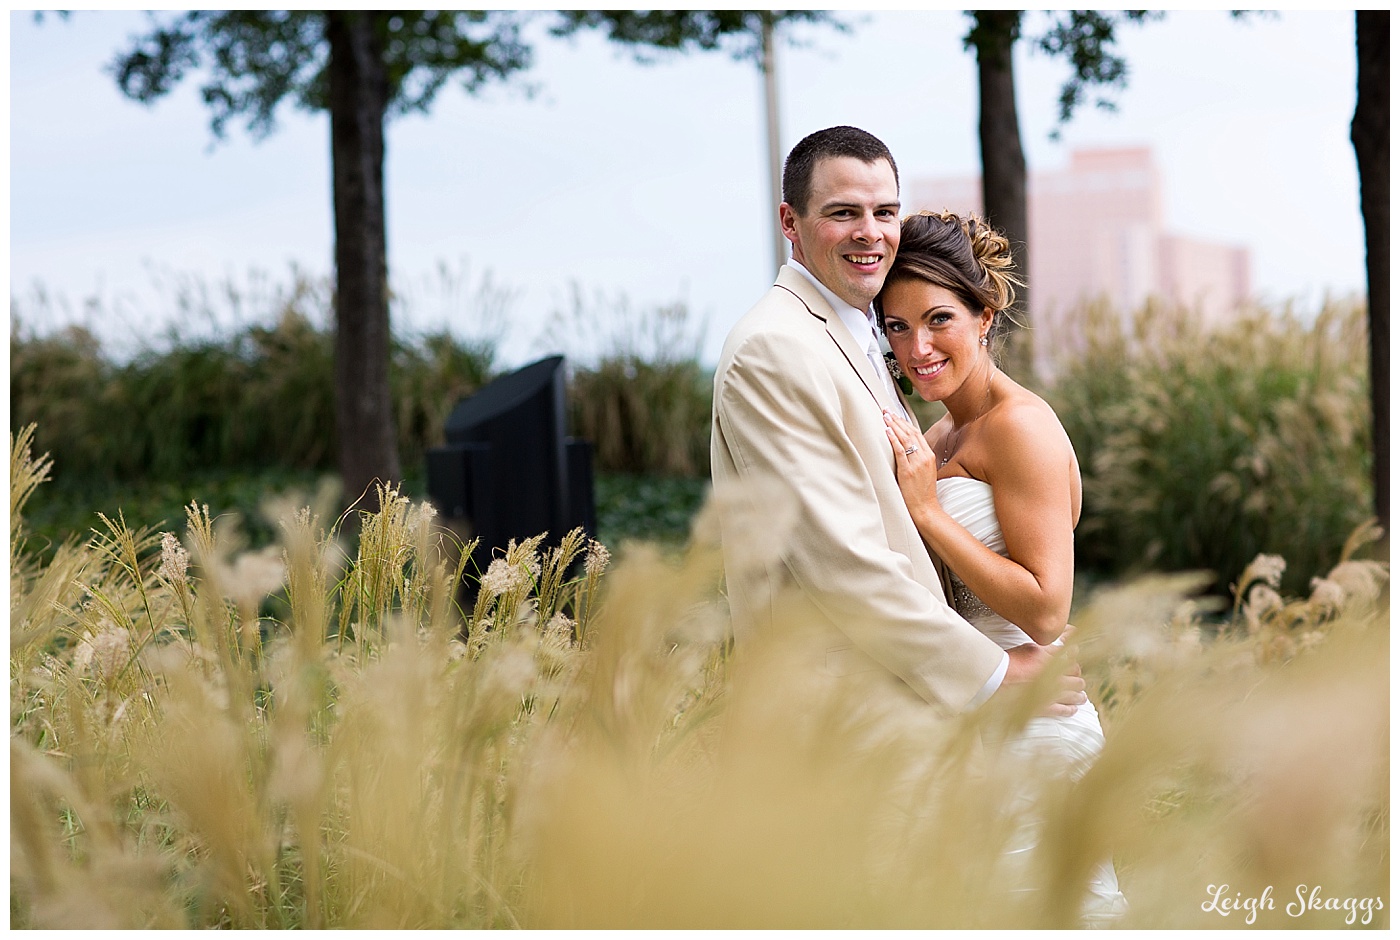 Tracey & Richard are Married!!  Their Half Moone Cruise and Celebration Center Sneak Peek!